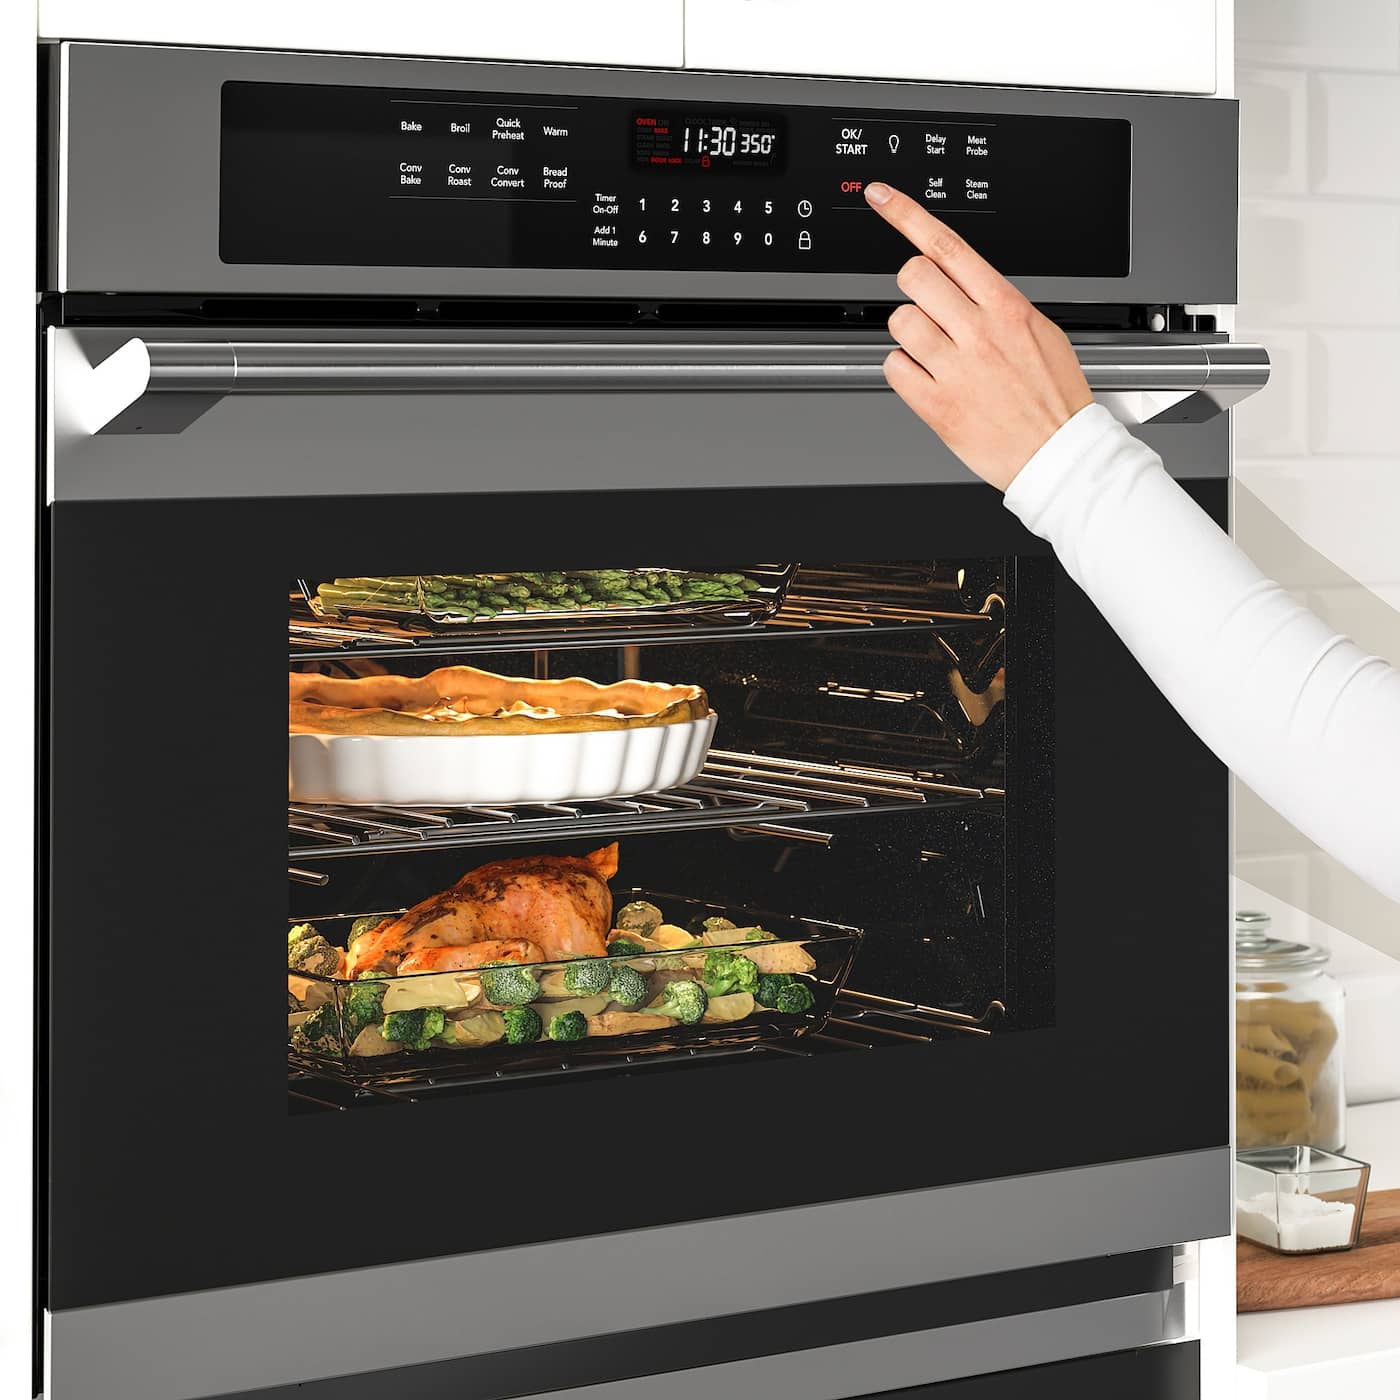 Oven Overheating: 9 Fast & Easy Ways To Fix The Problem Now